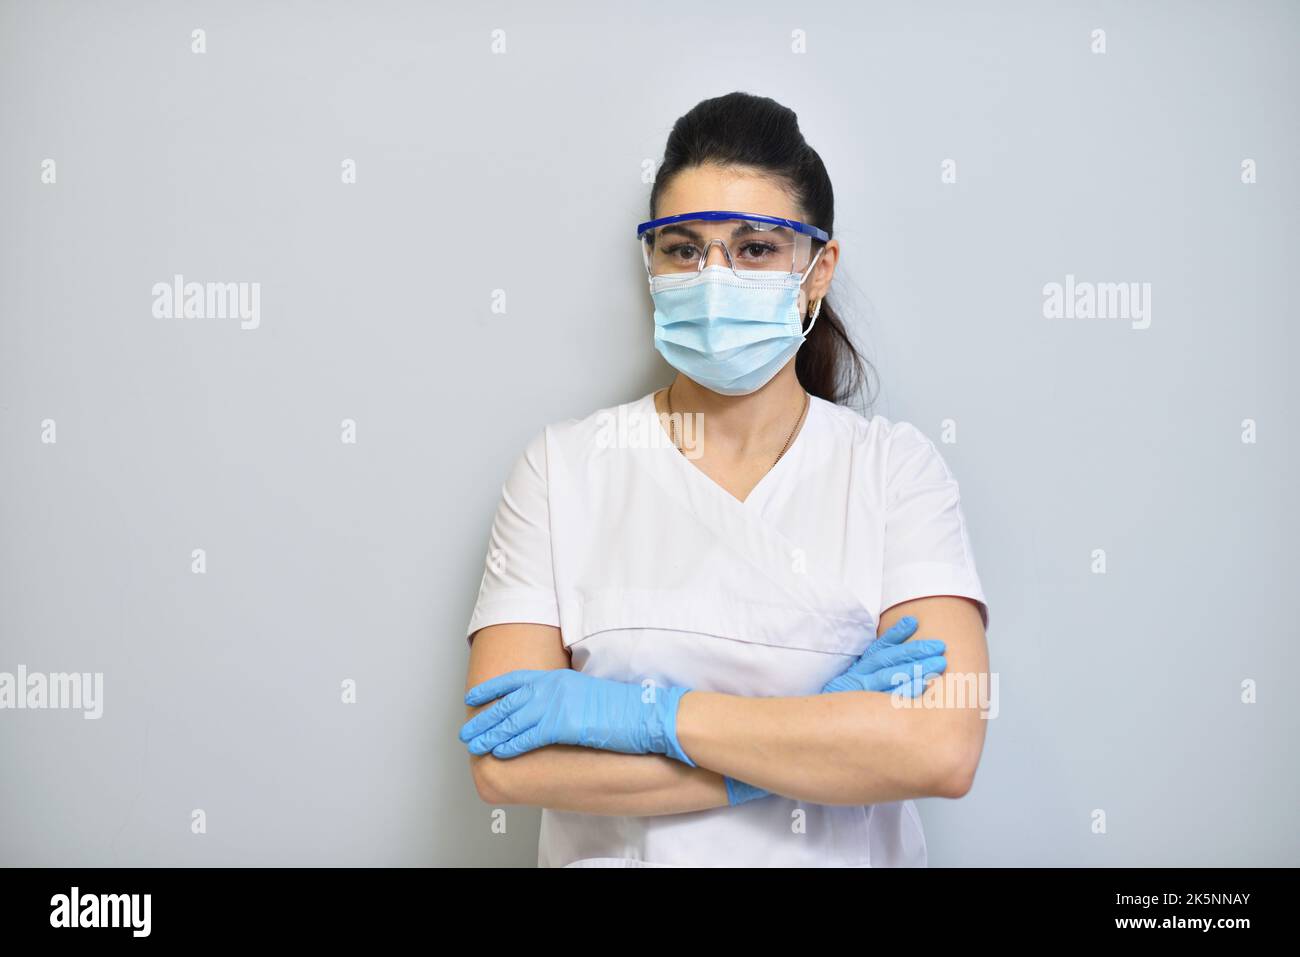 Cute woman dentist in uniform, protective glasses and face mask. Stock Photo